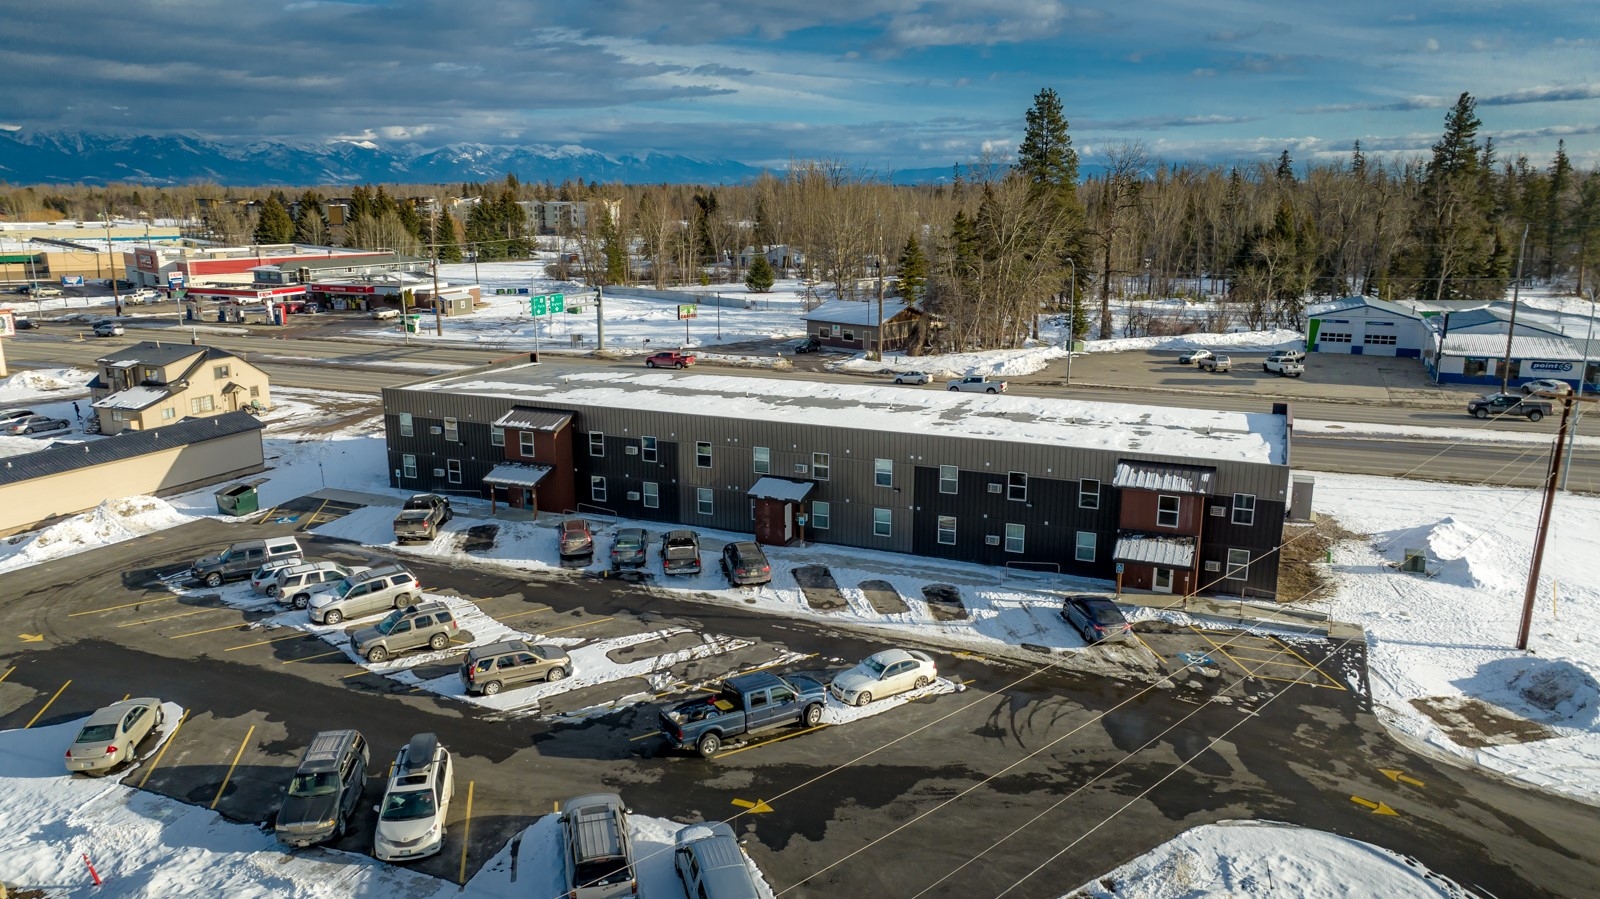 9 River Road Road E Kalispell Apartment Waterfront